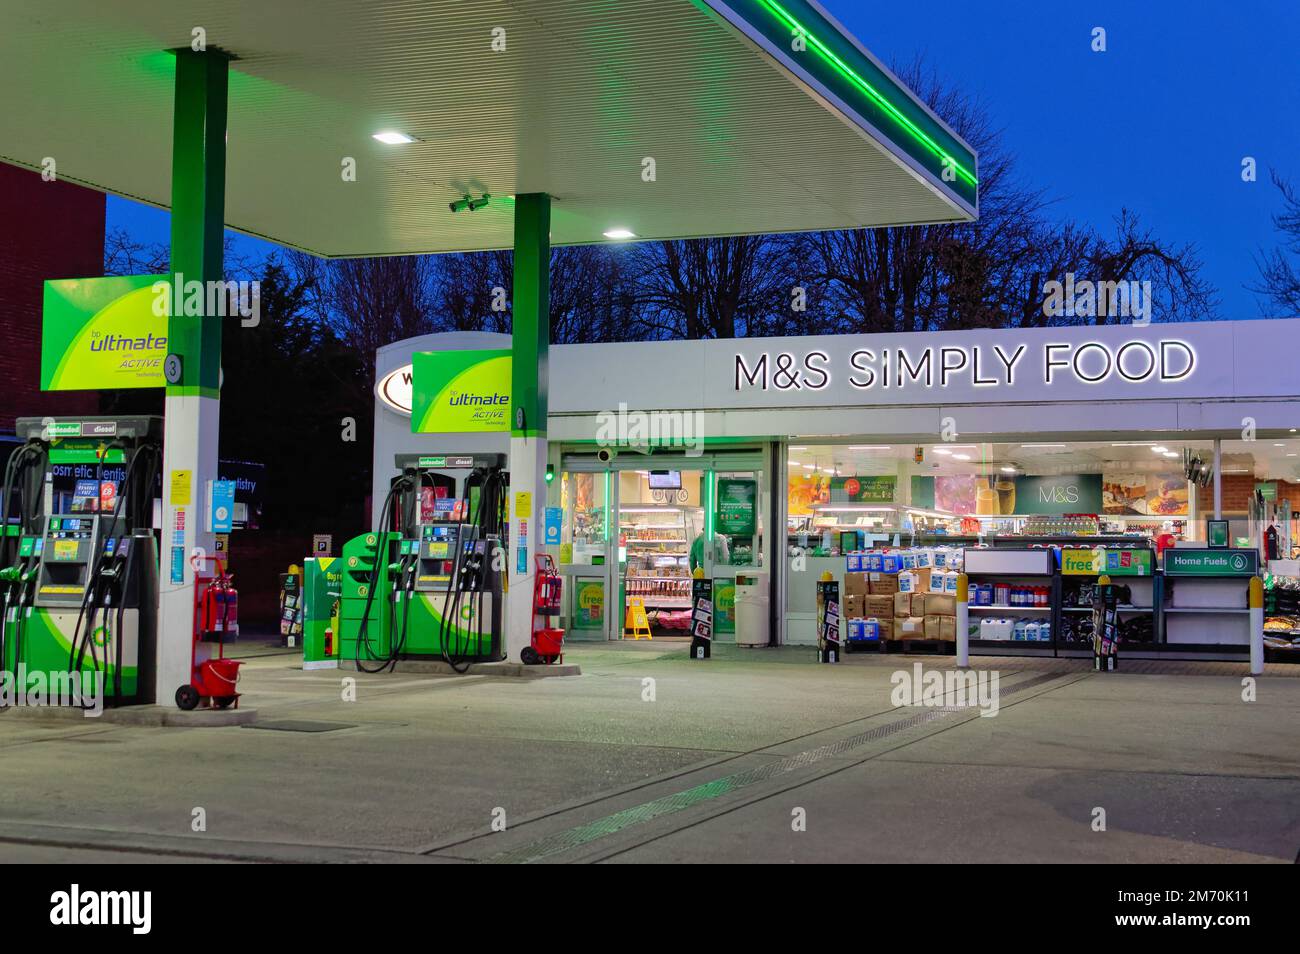 The forecourt of the BP petrol station at dusk with a Marks and Spencer Simply Food outlet shop in Shepperton High Street Surrey England UK Stock Photo